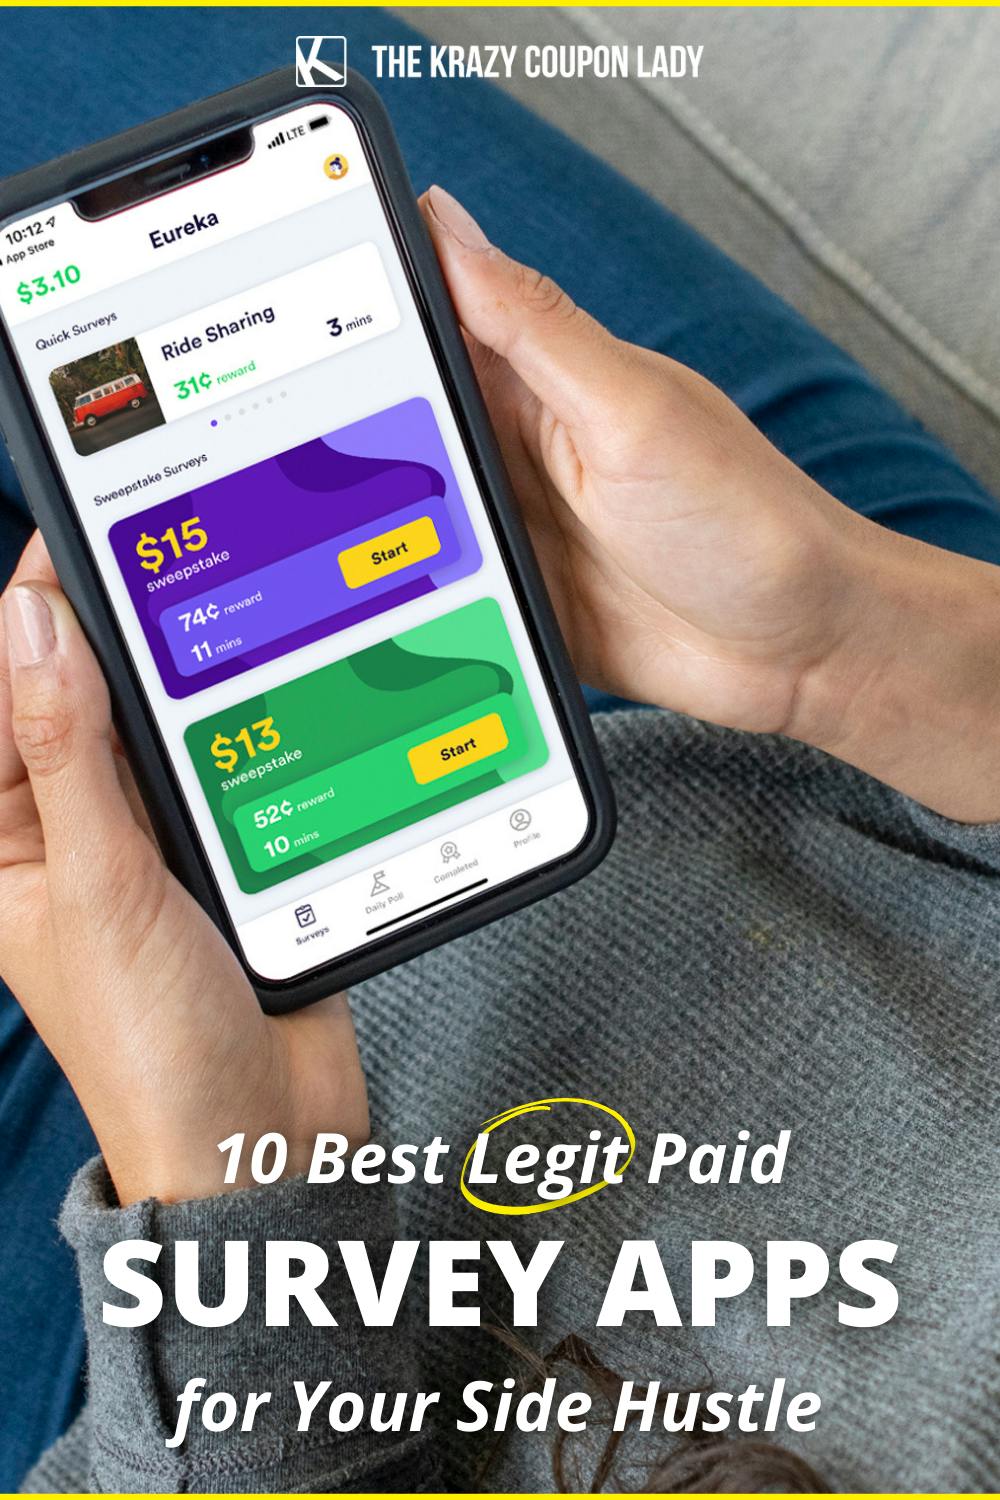 10 Best Paid Survey Apps for Your Side Hustle